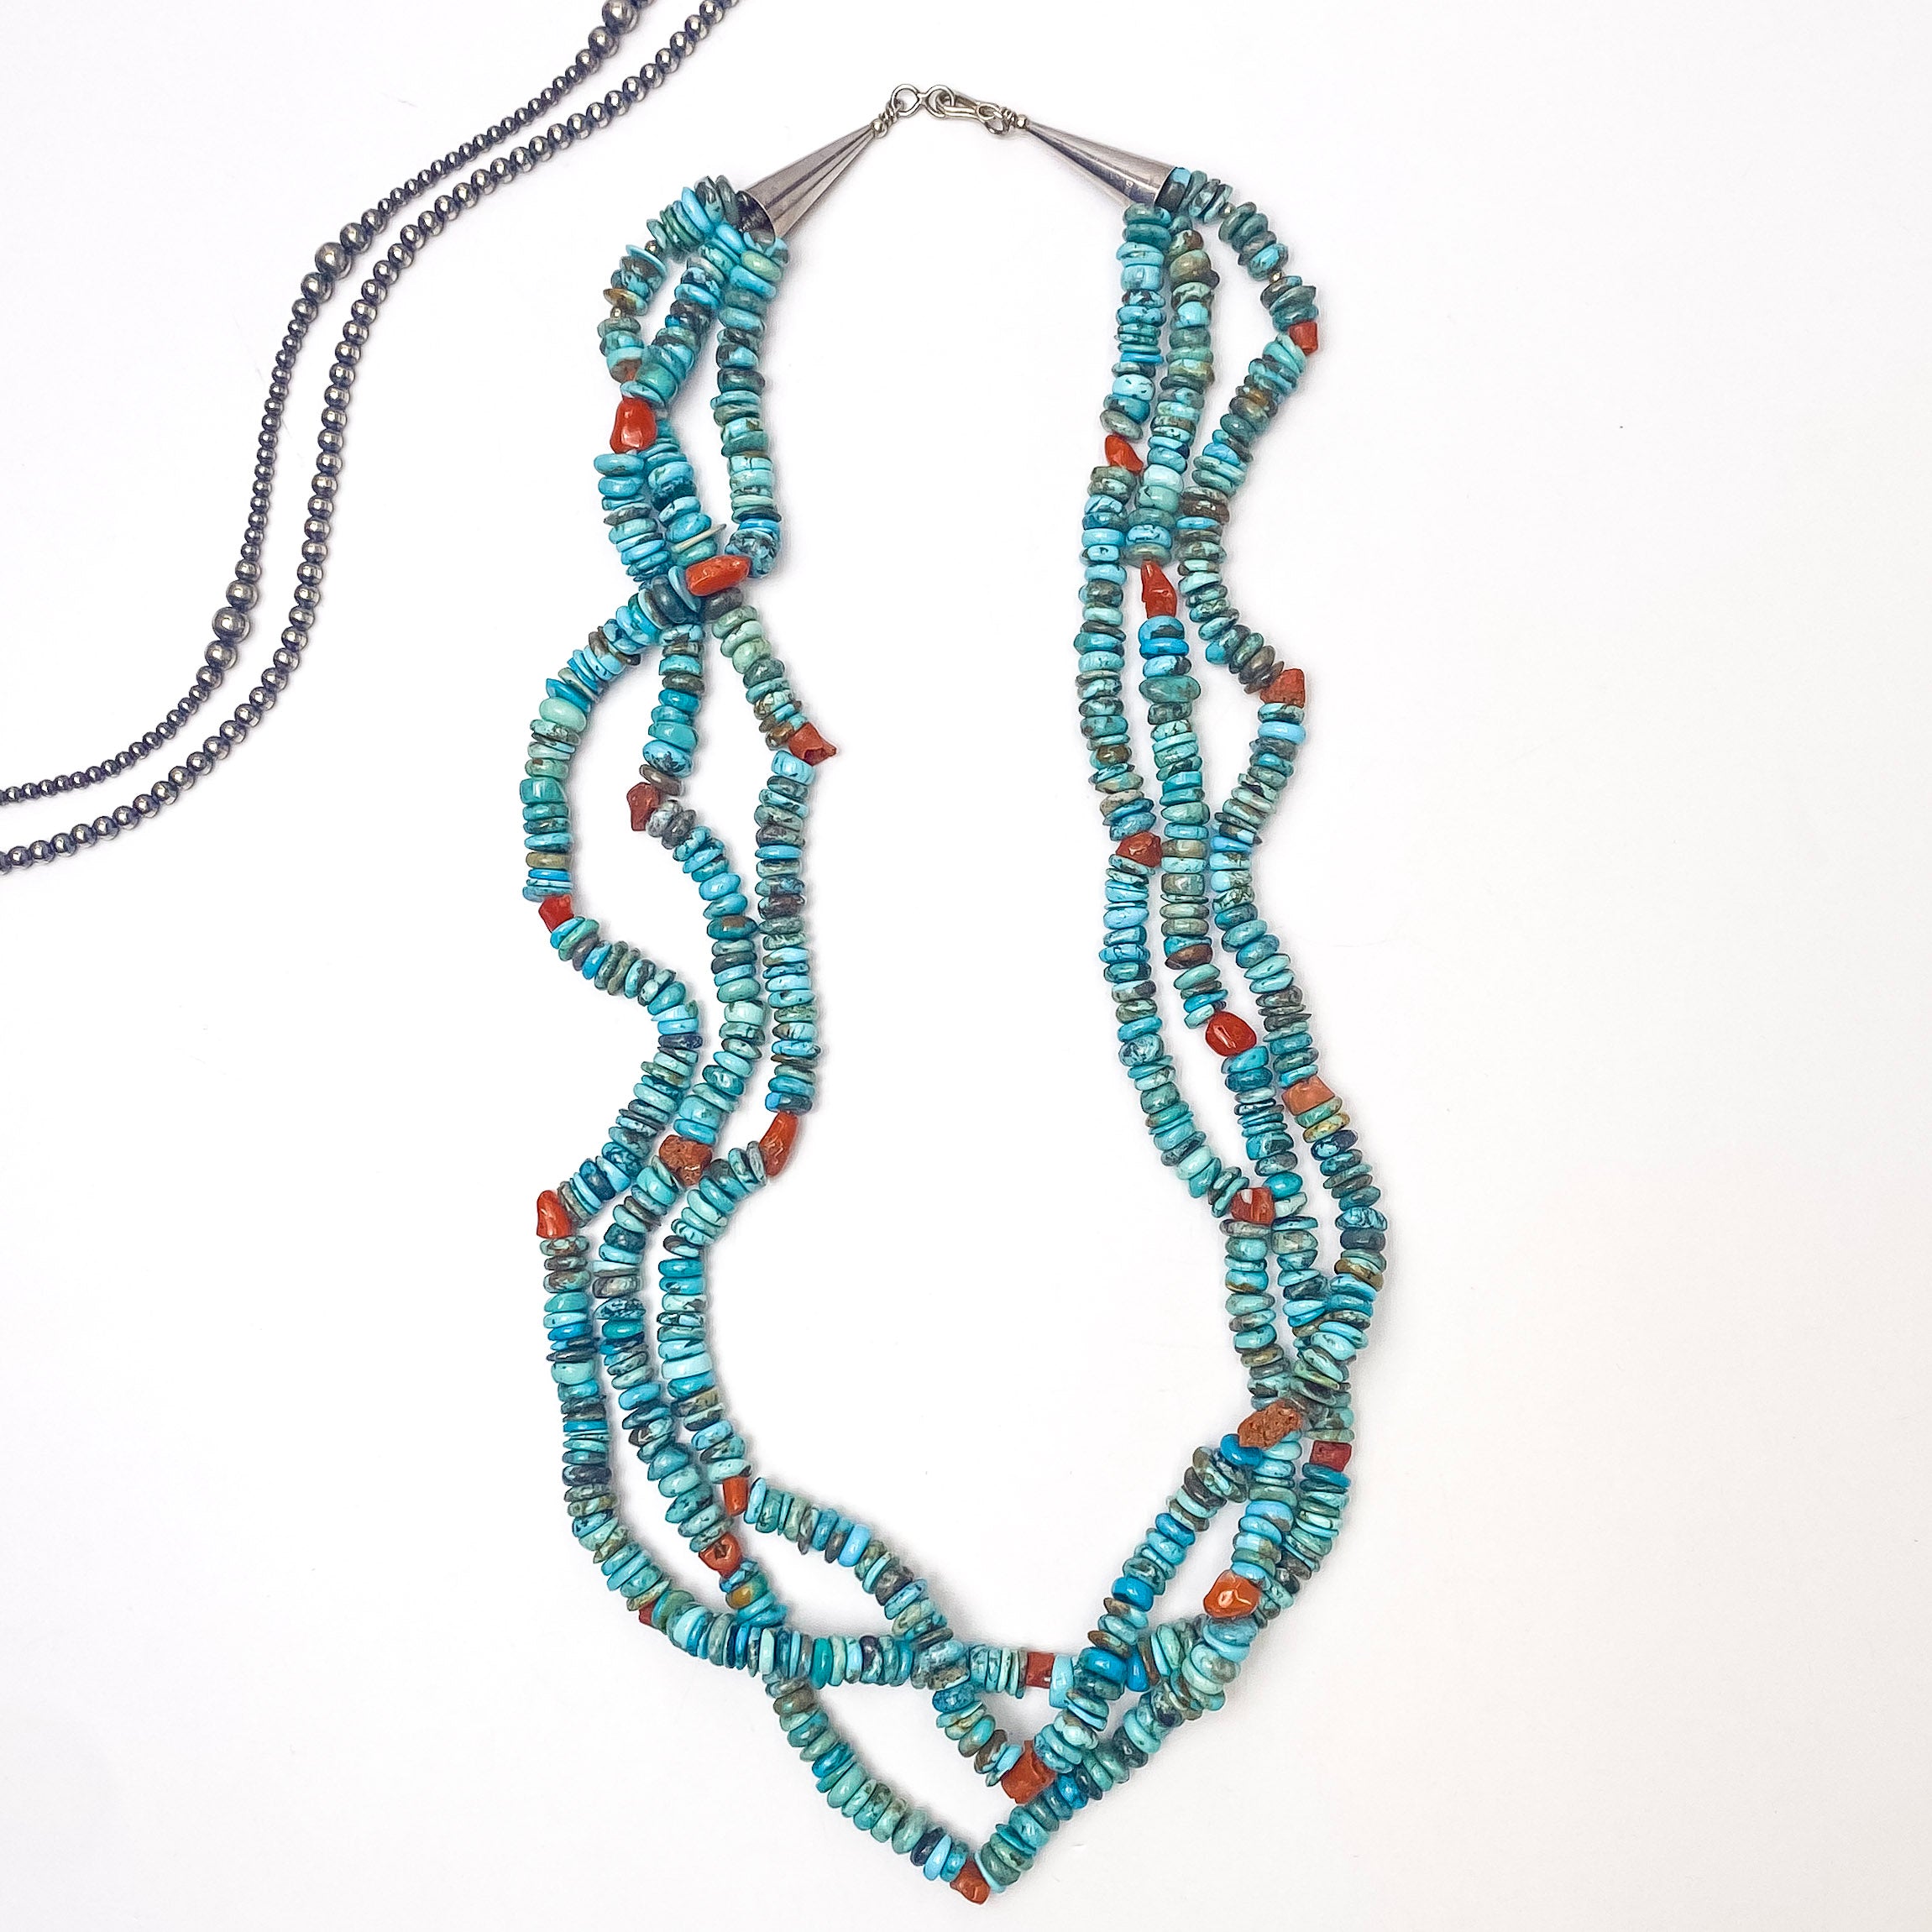 In the picture is a three strand necklace with natural turquoise and coral beading with a white background